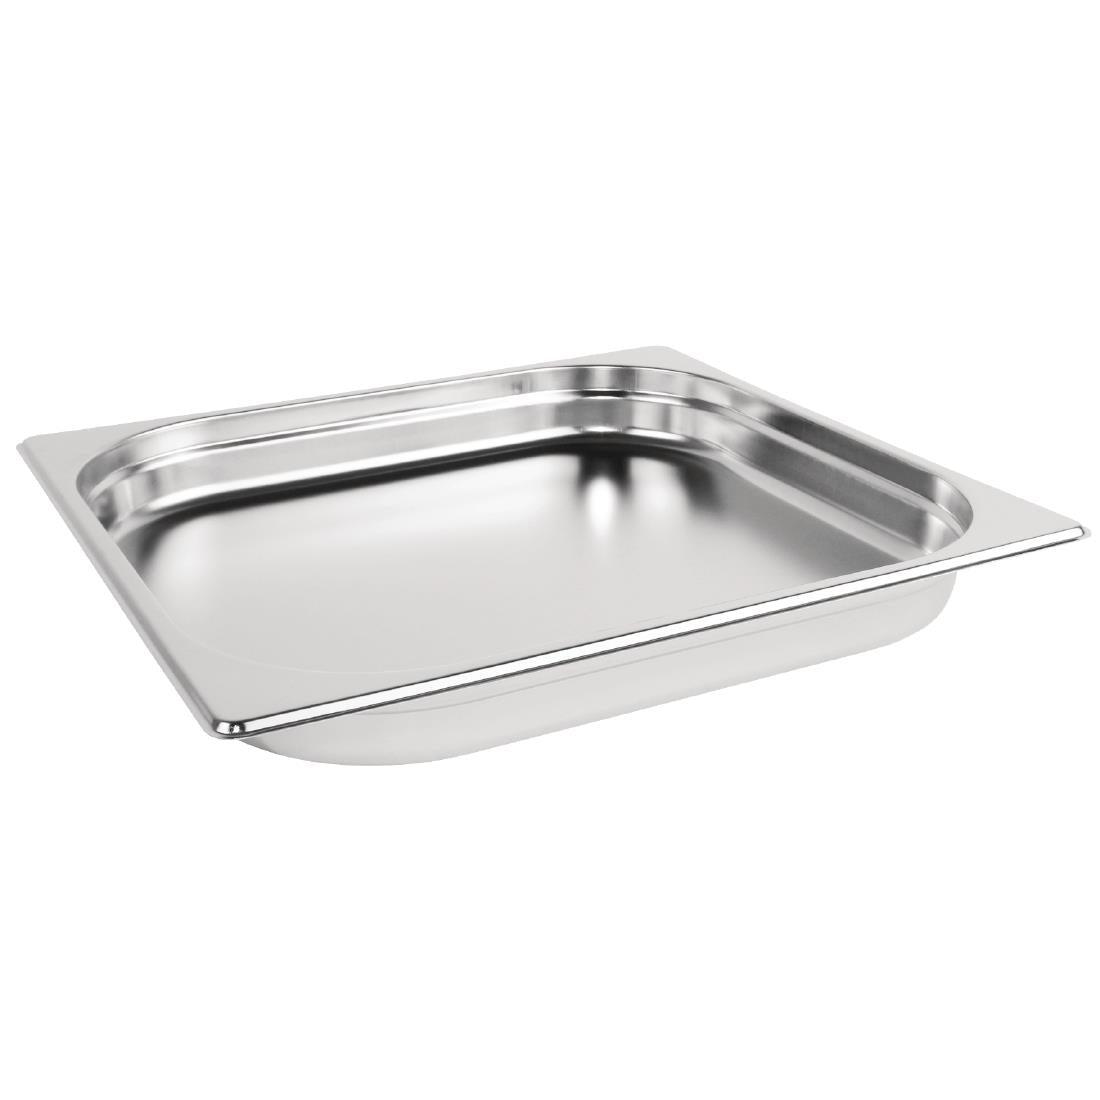 Vogue Stainless Steel 2/3 Gastronorm Tray 40mm - HospoStore